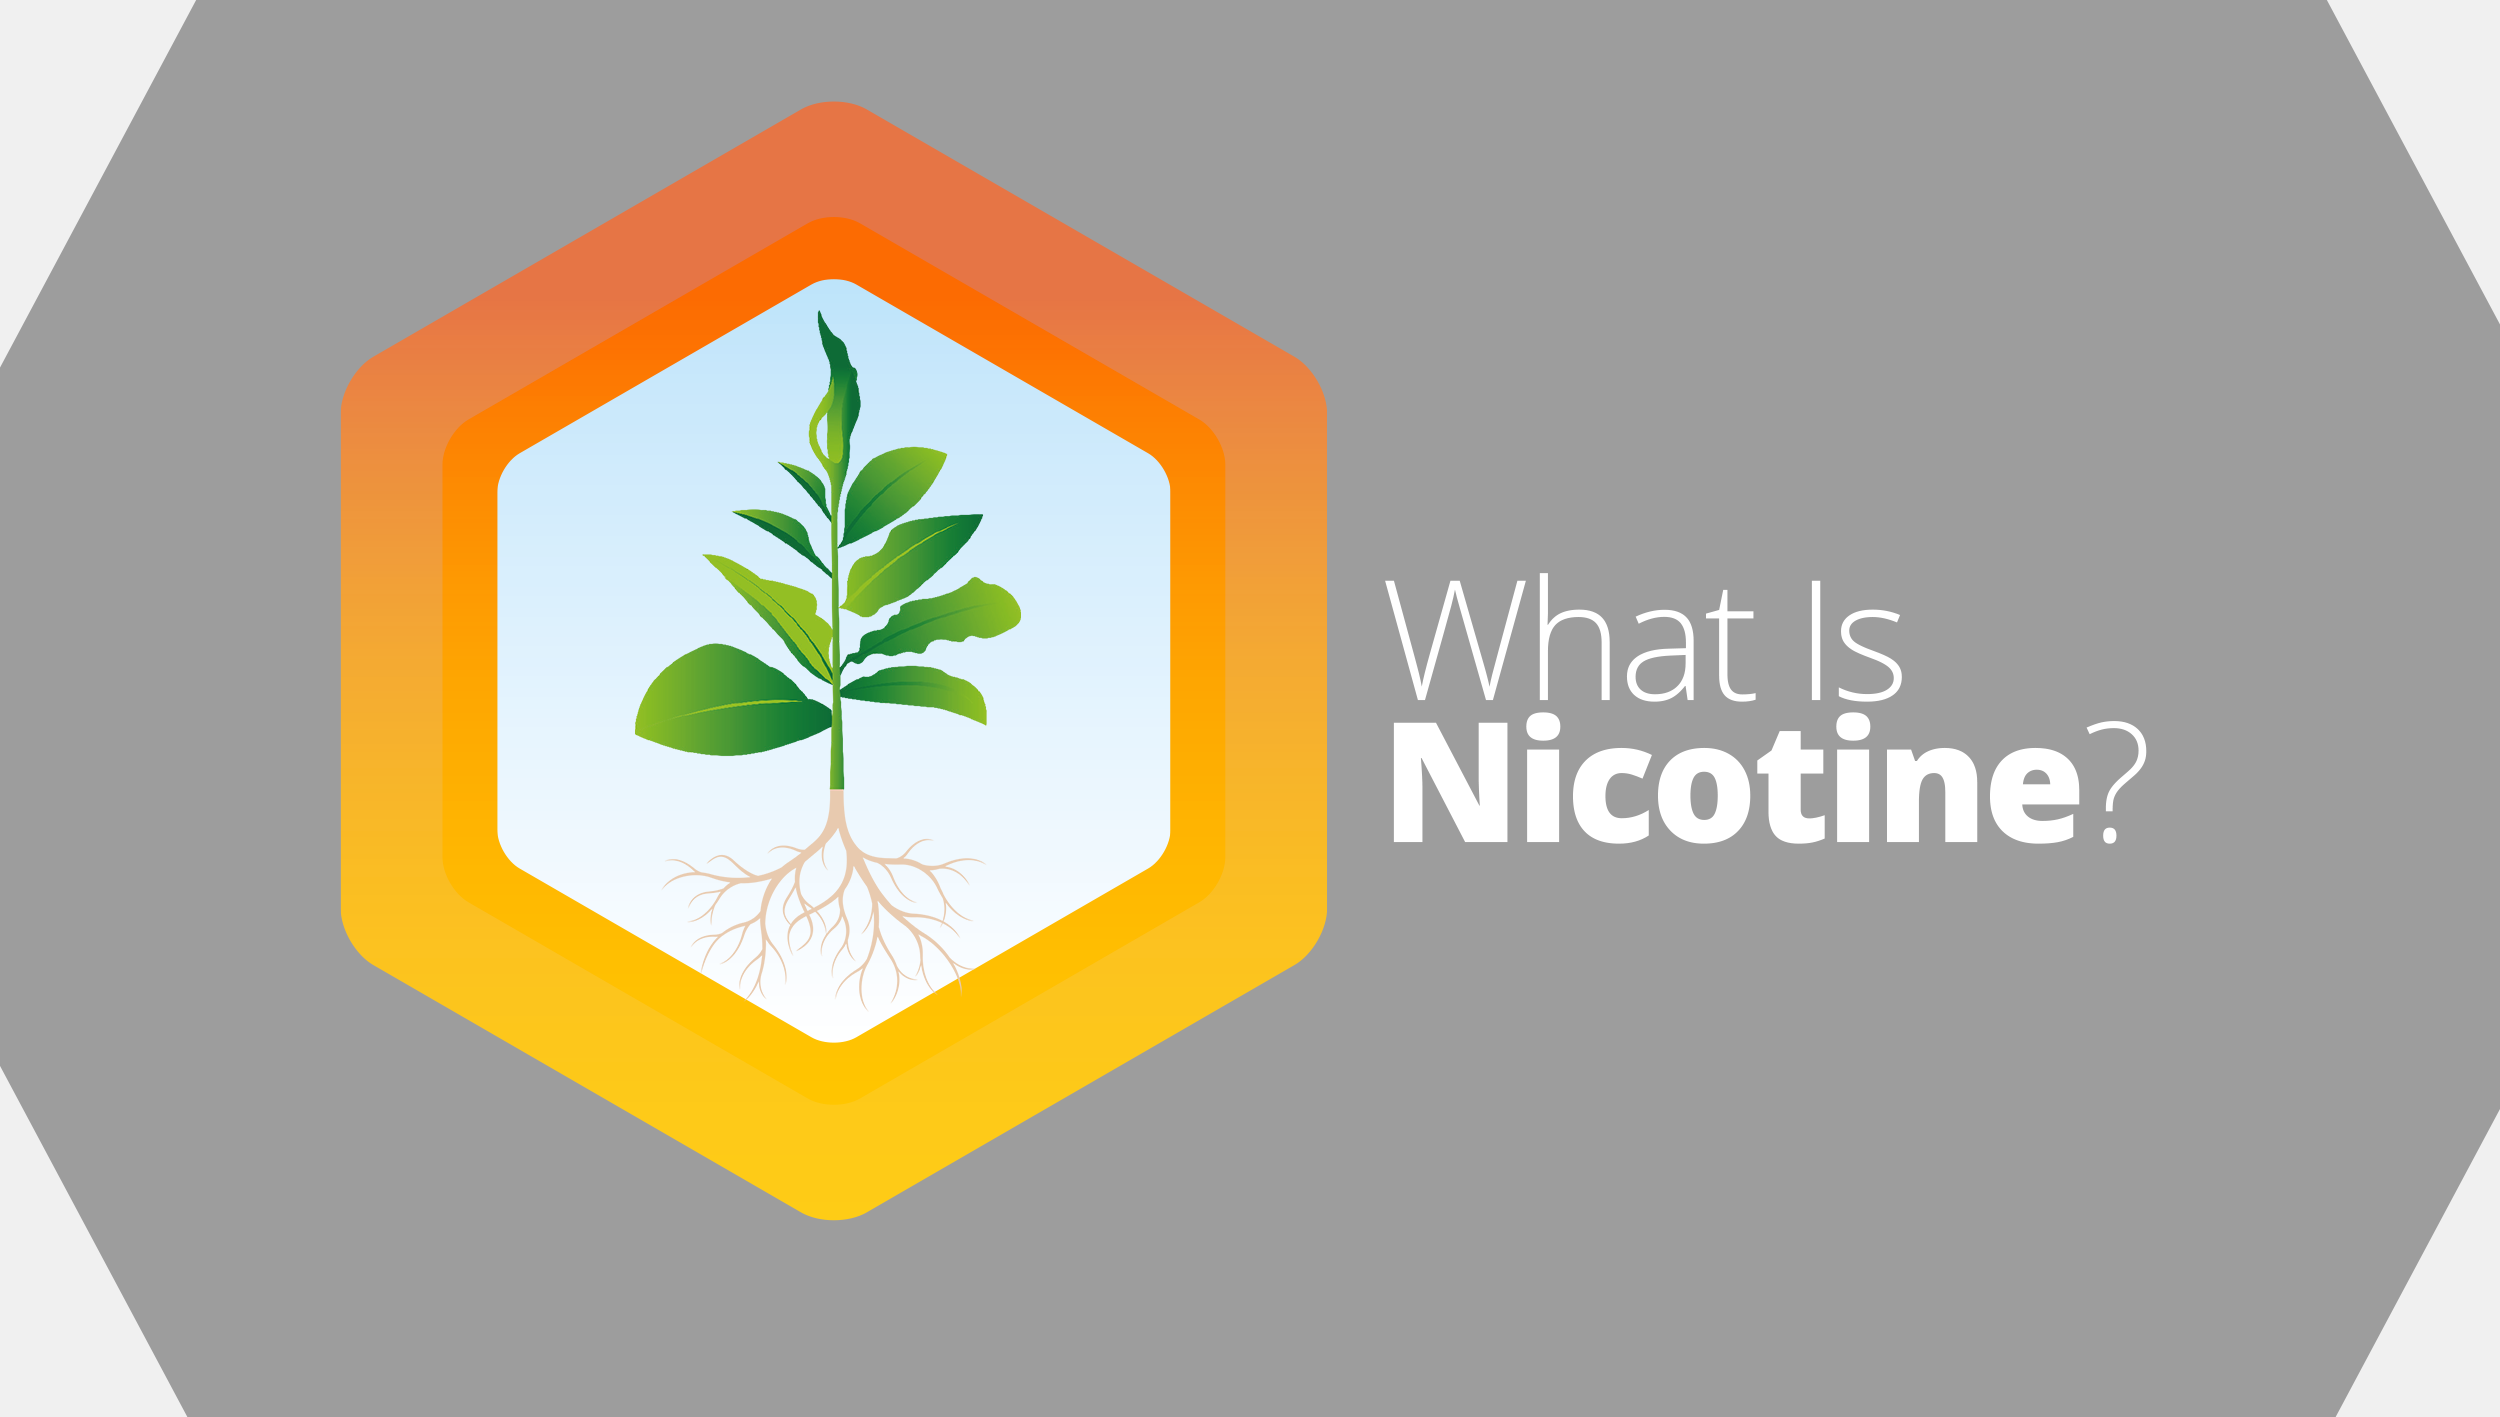 What is nicotine?